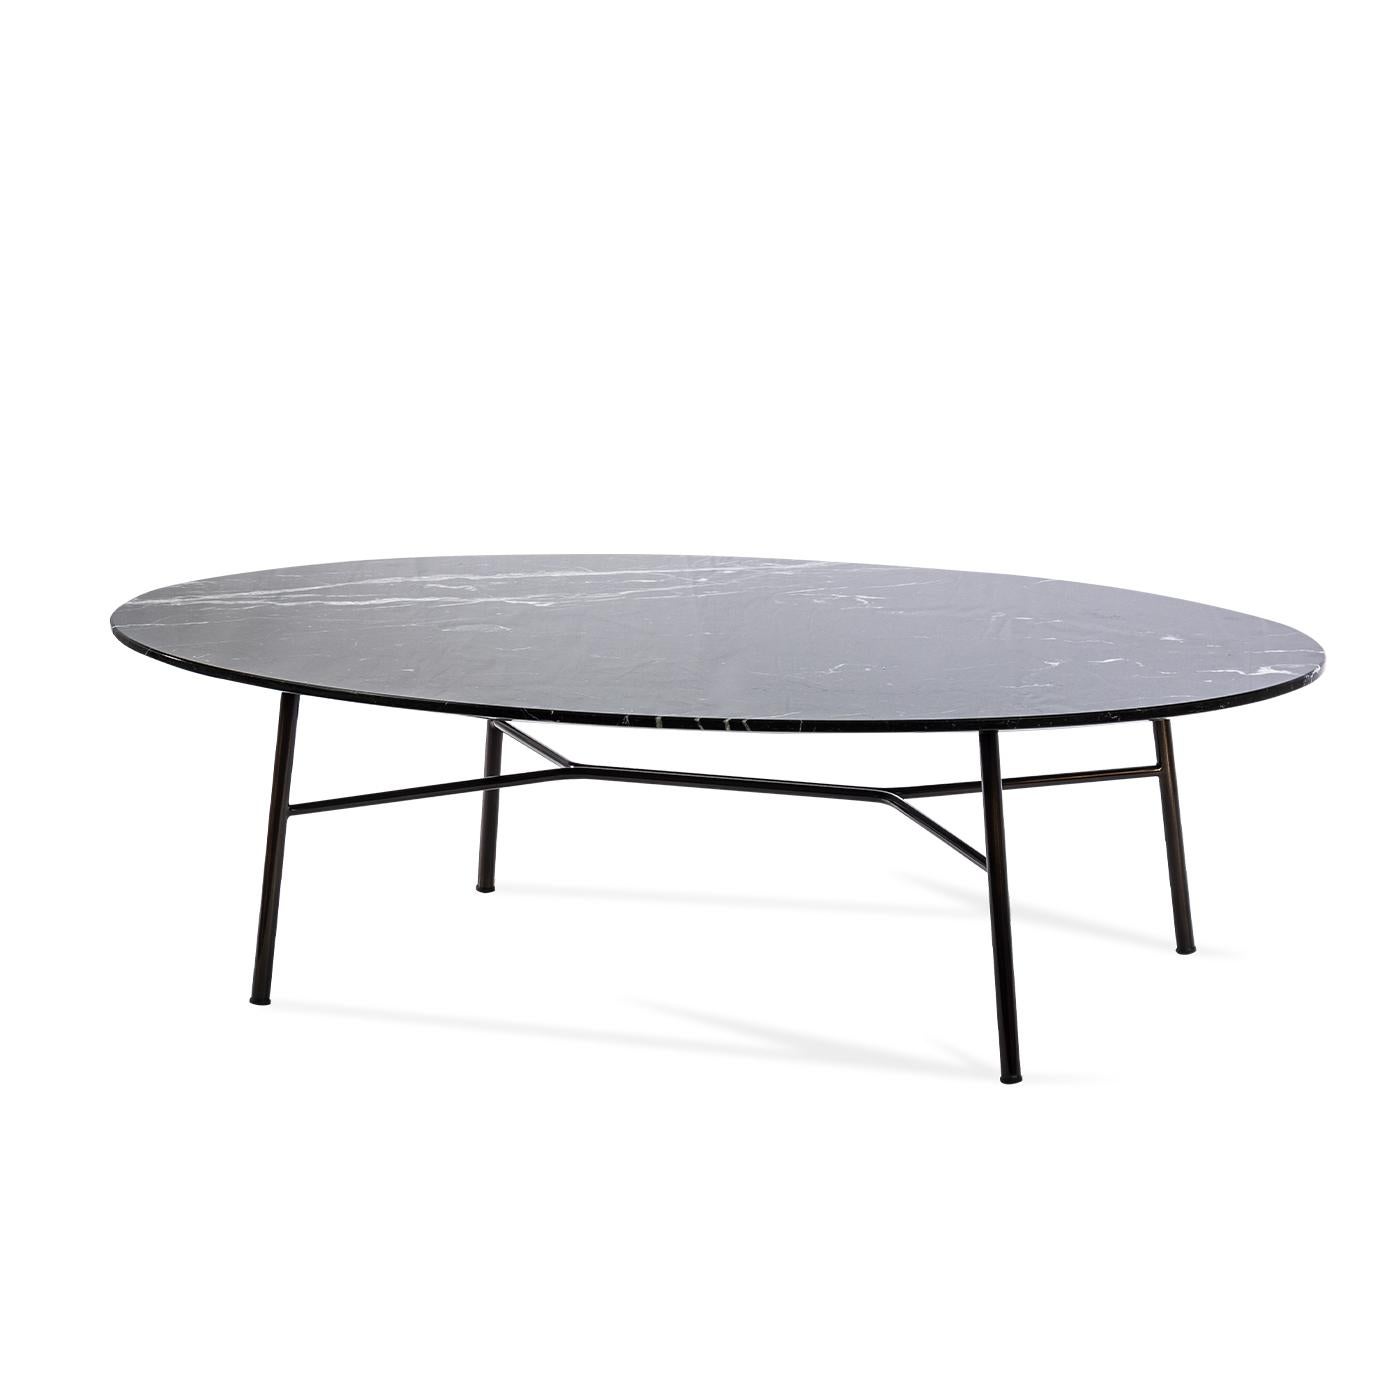 Boasting a dramatic monochromatic look, this coffee table will be a striking centerpiece in a modern living room, with its black Y-shaped metal base and black Marquinia marble oval top. This versatile design from the Yuki Collection merges